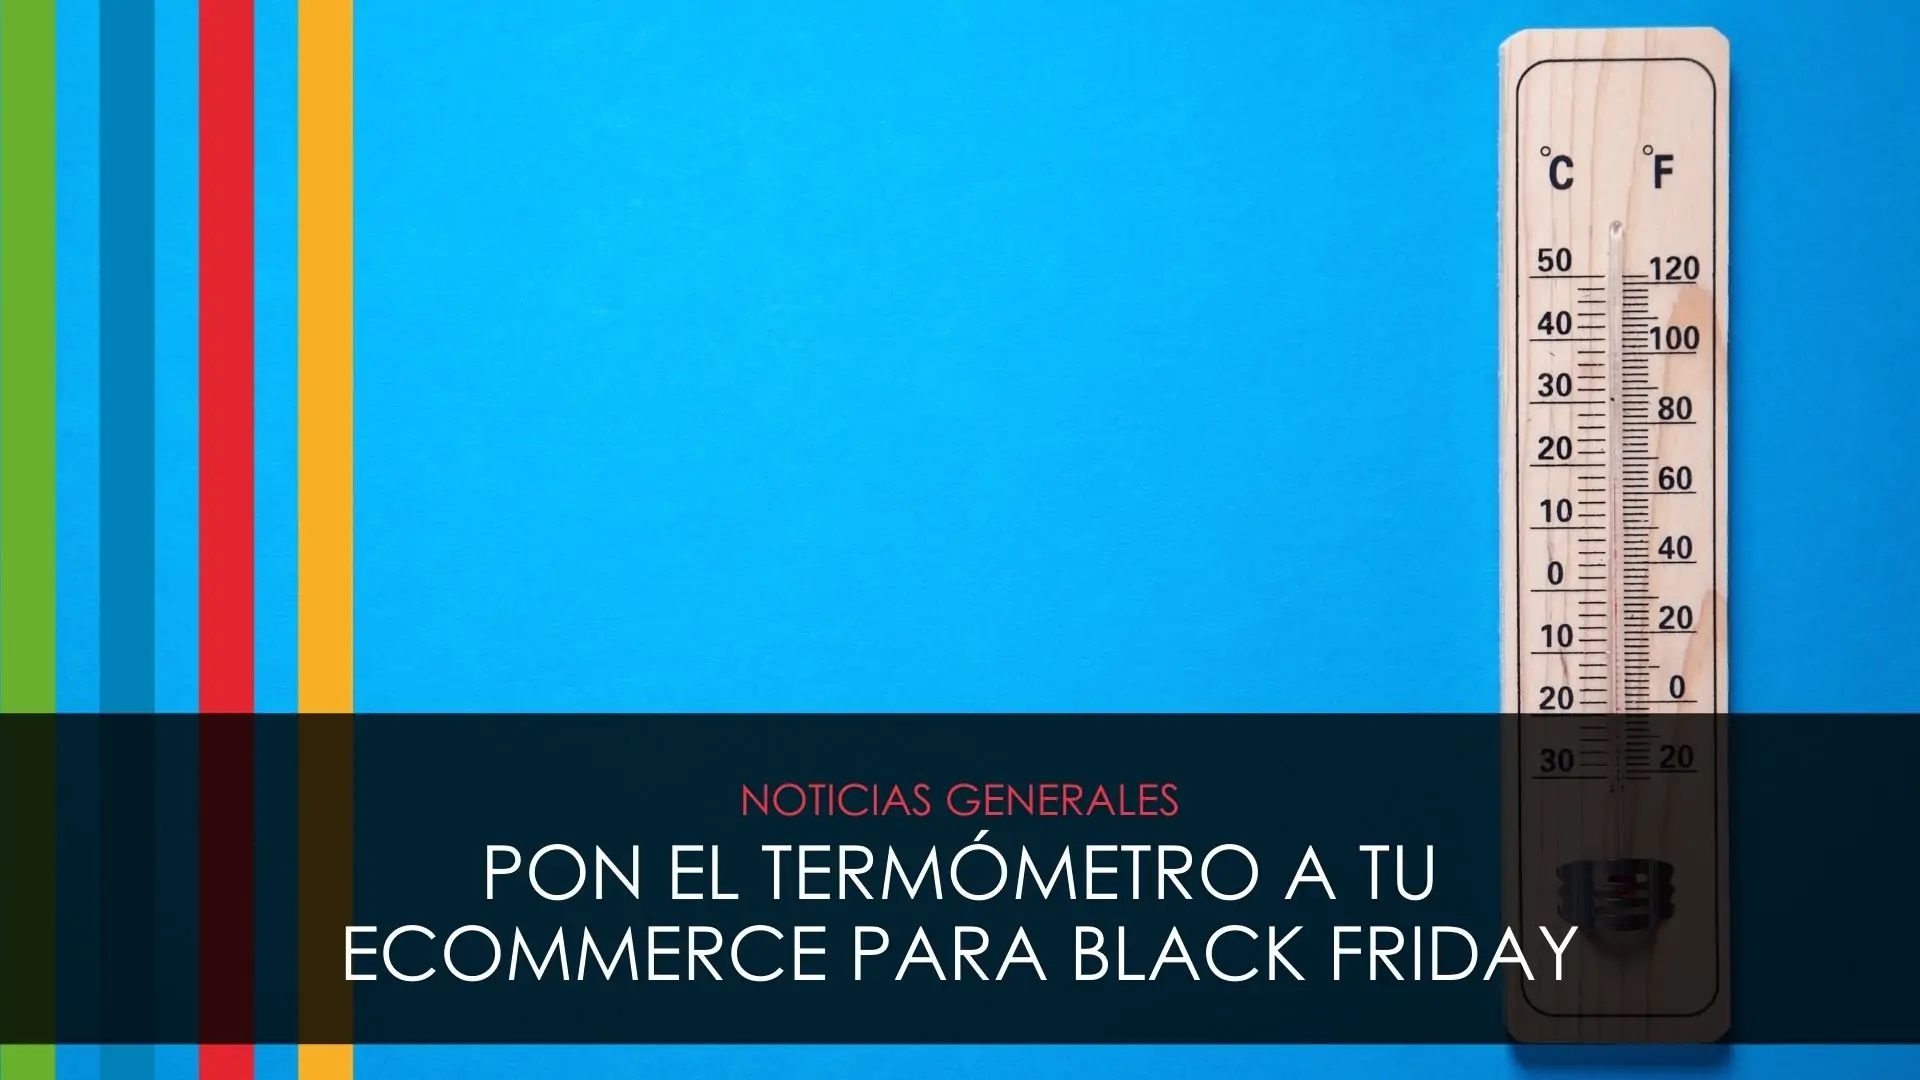 Put the thermometer on your ecommerce for Black Friday